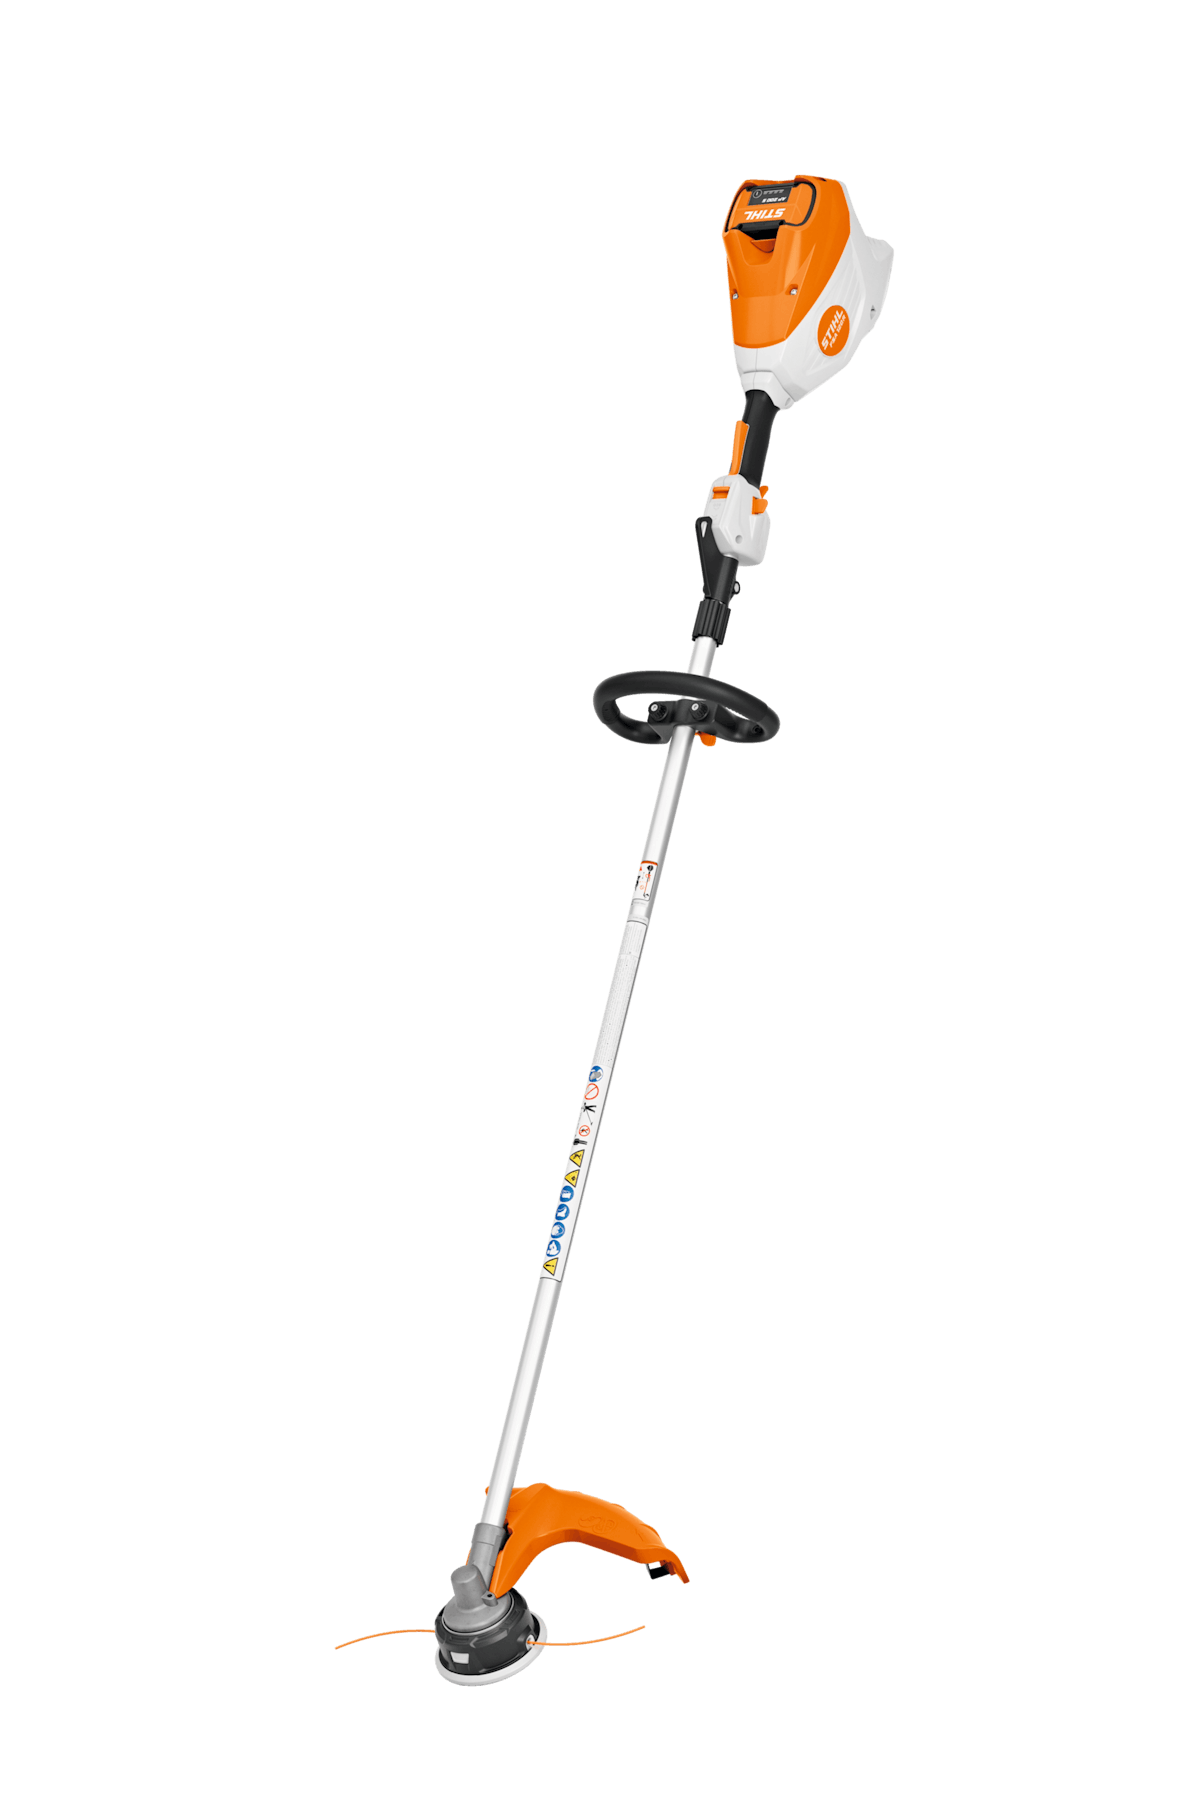 STIHL Announces New Battery-powered Products From: Stihl Inc.